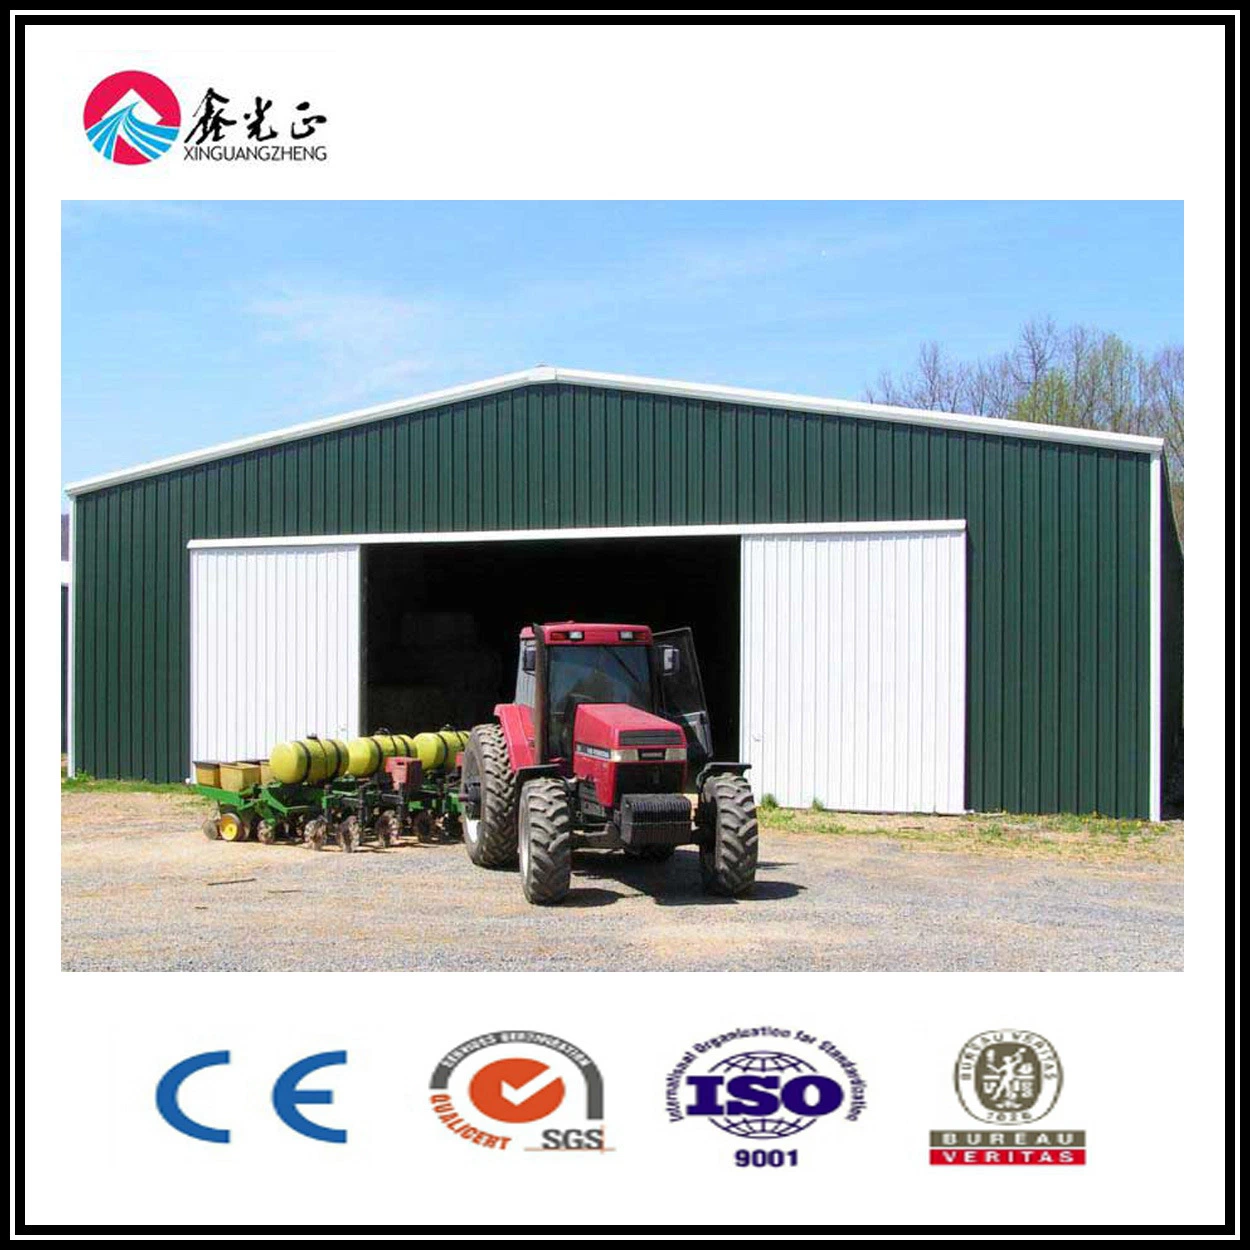 Steel Structure Warehouse with Length of 50 Meters and Width of 30 Meters.